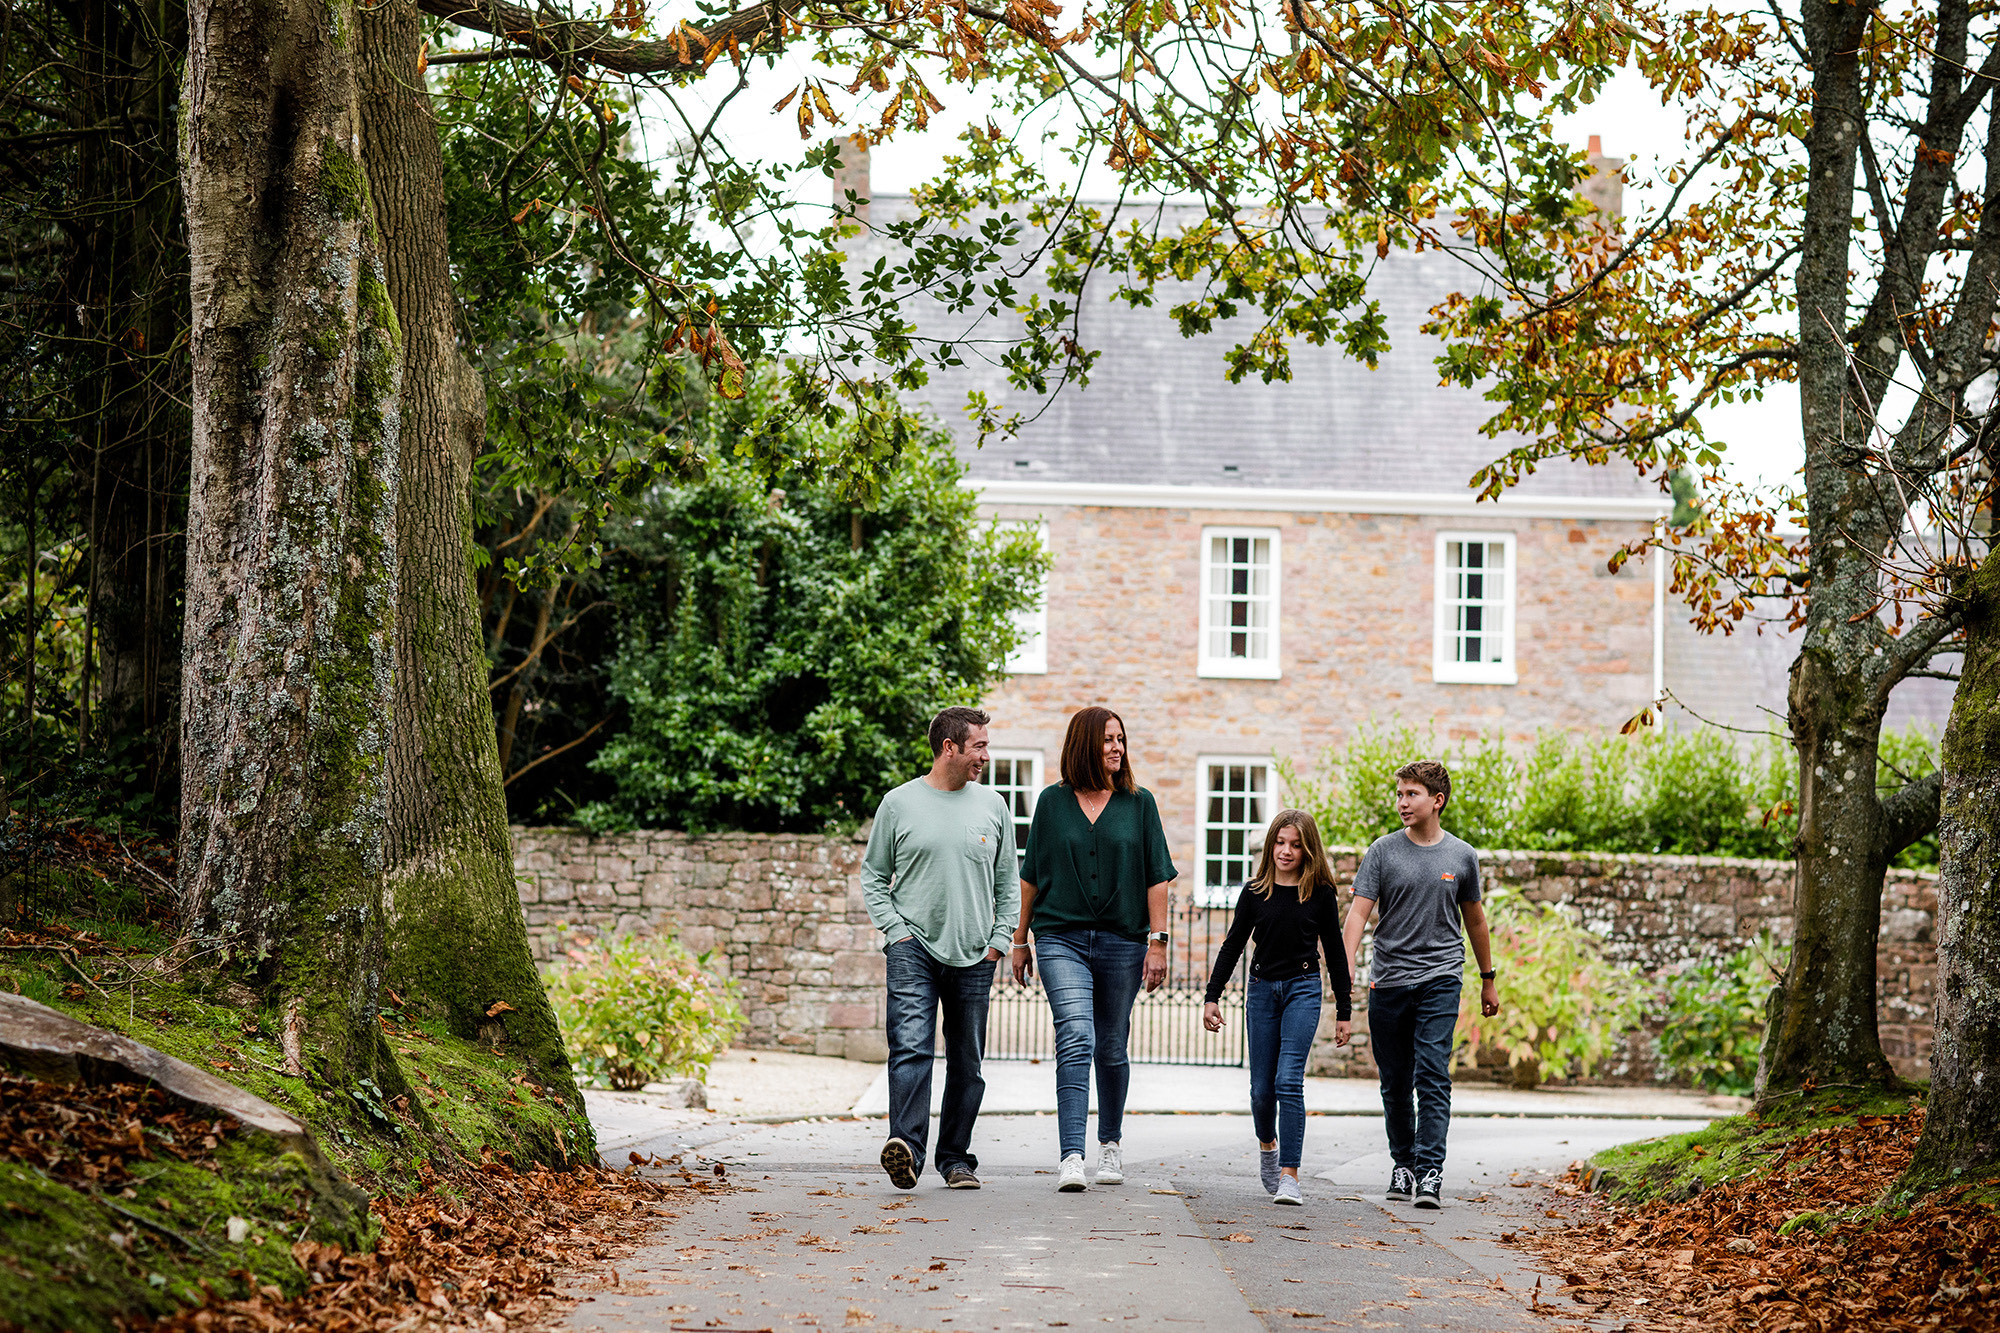 A family walk past a period house in the Jersey countryside.